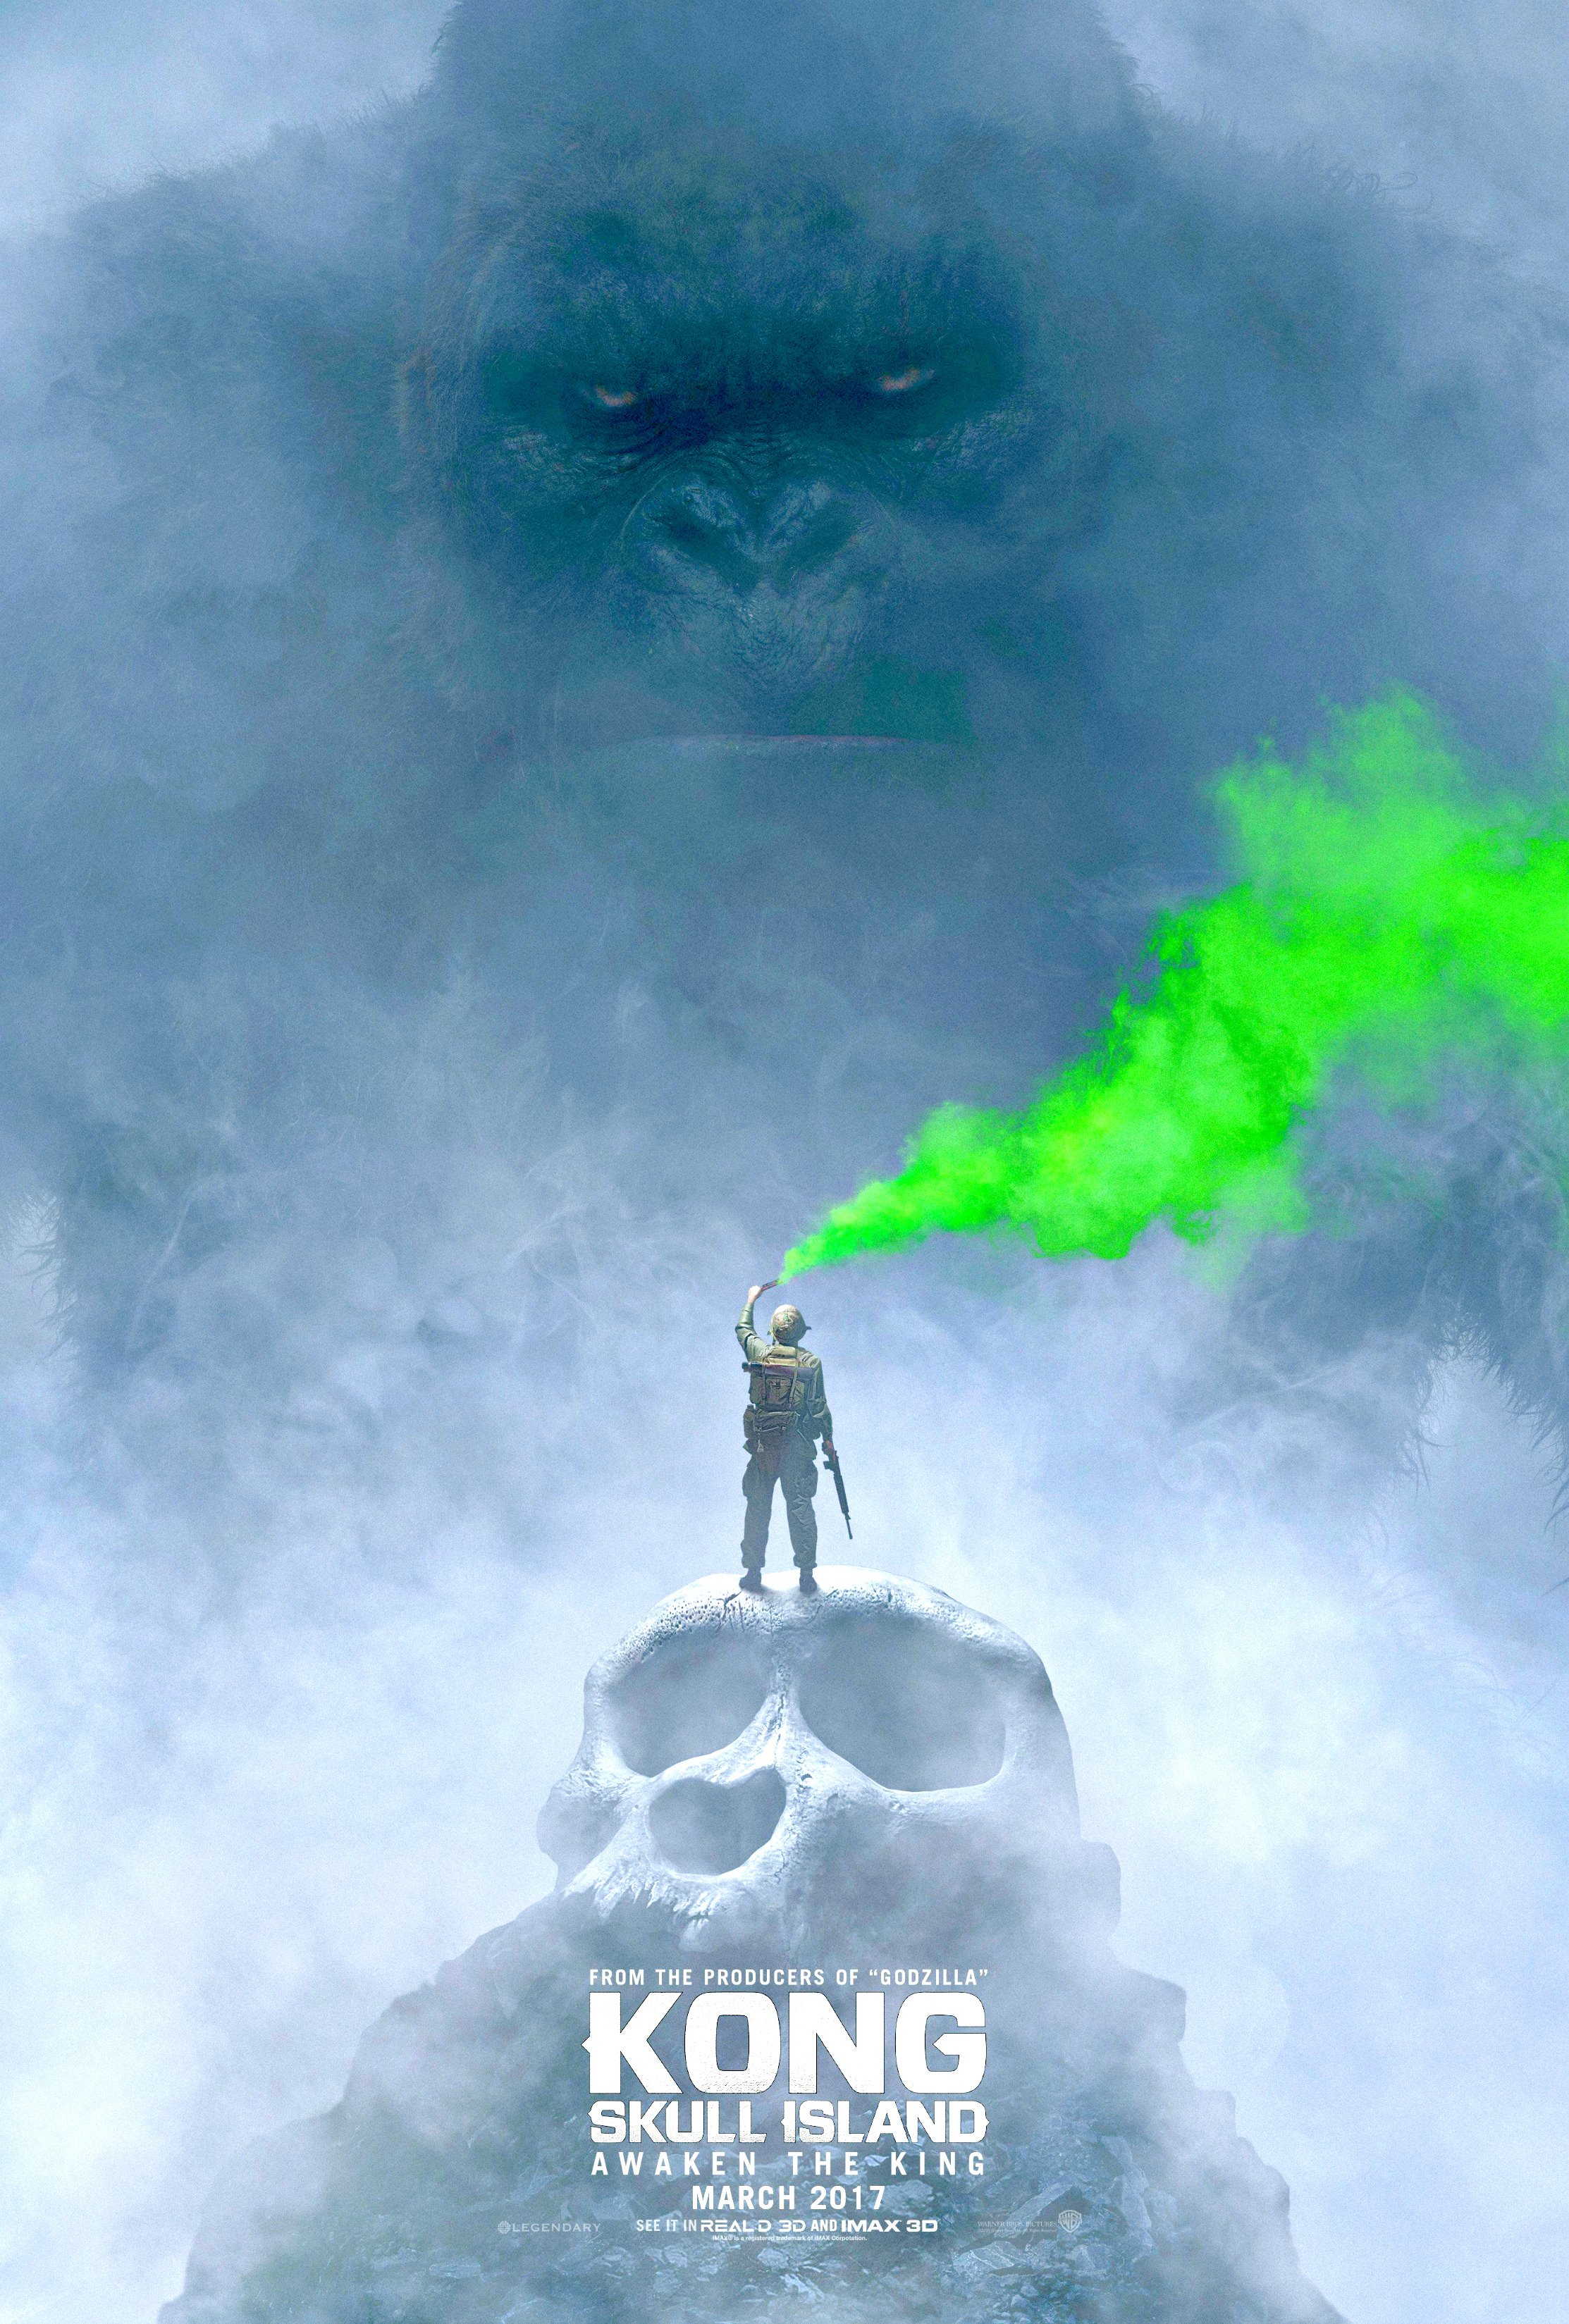 Images of Kong: Skull Island | 2226x3298